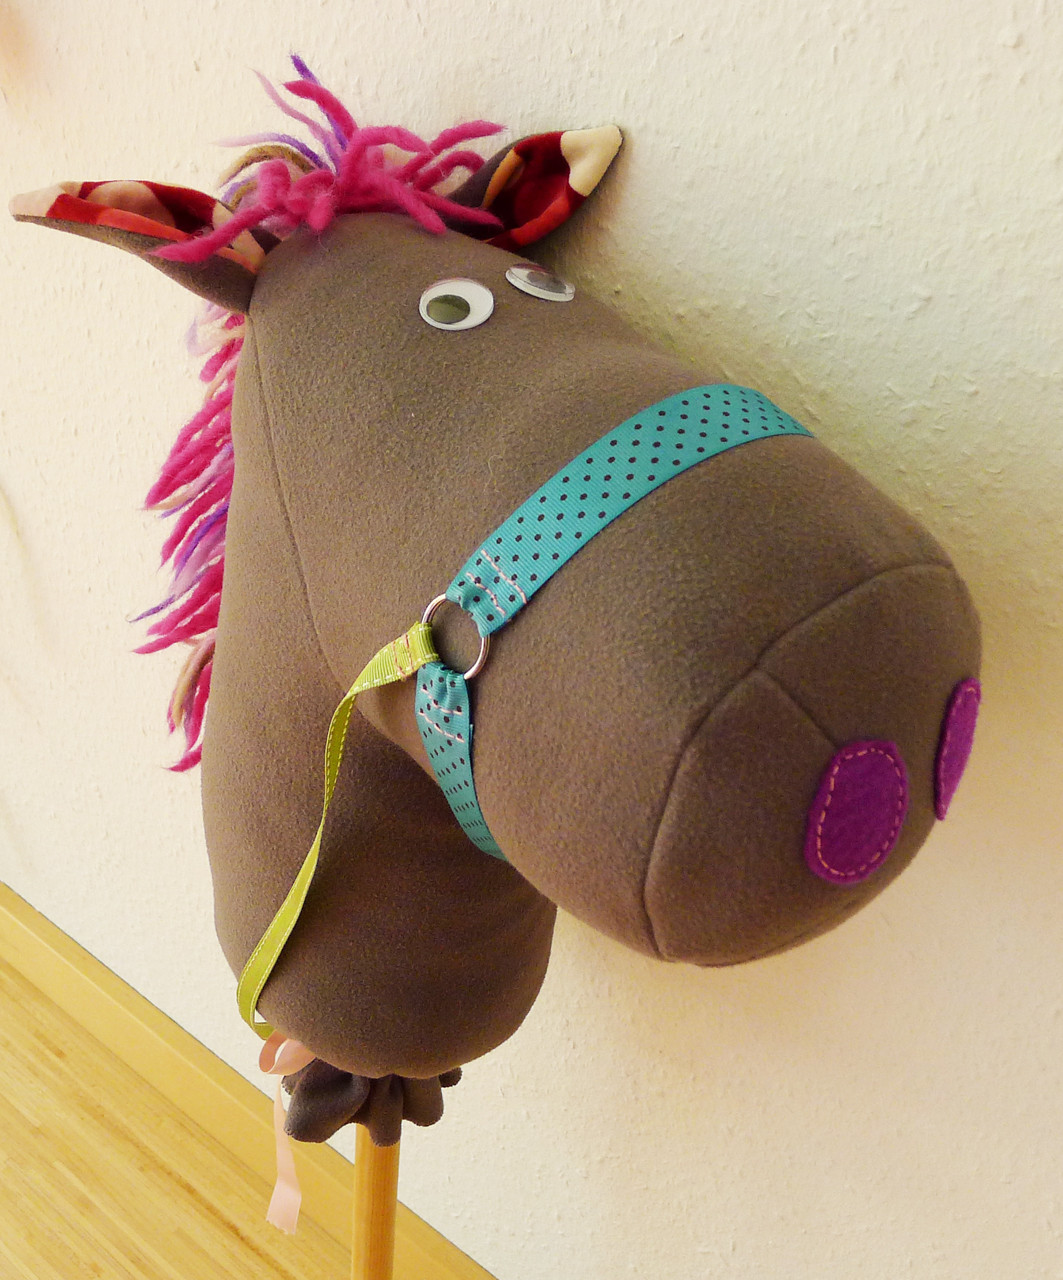 Horse Crafts For Adults
 Make a Hobby Horse